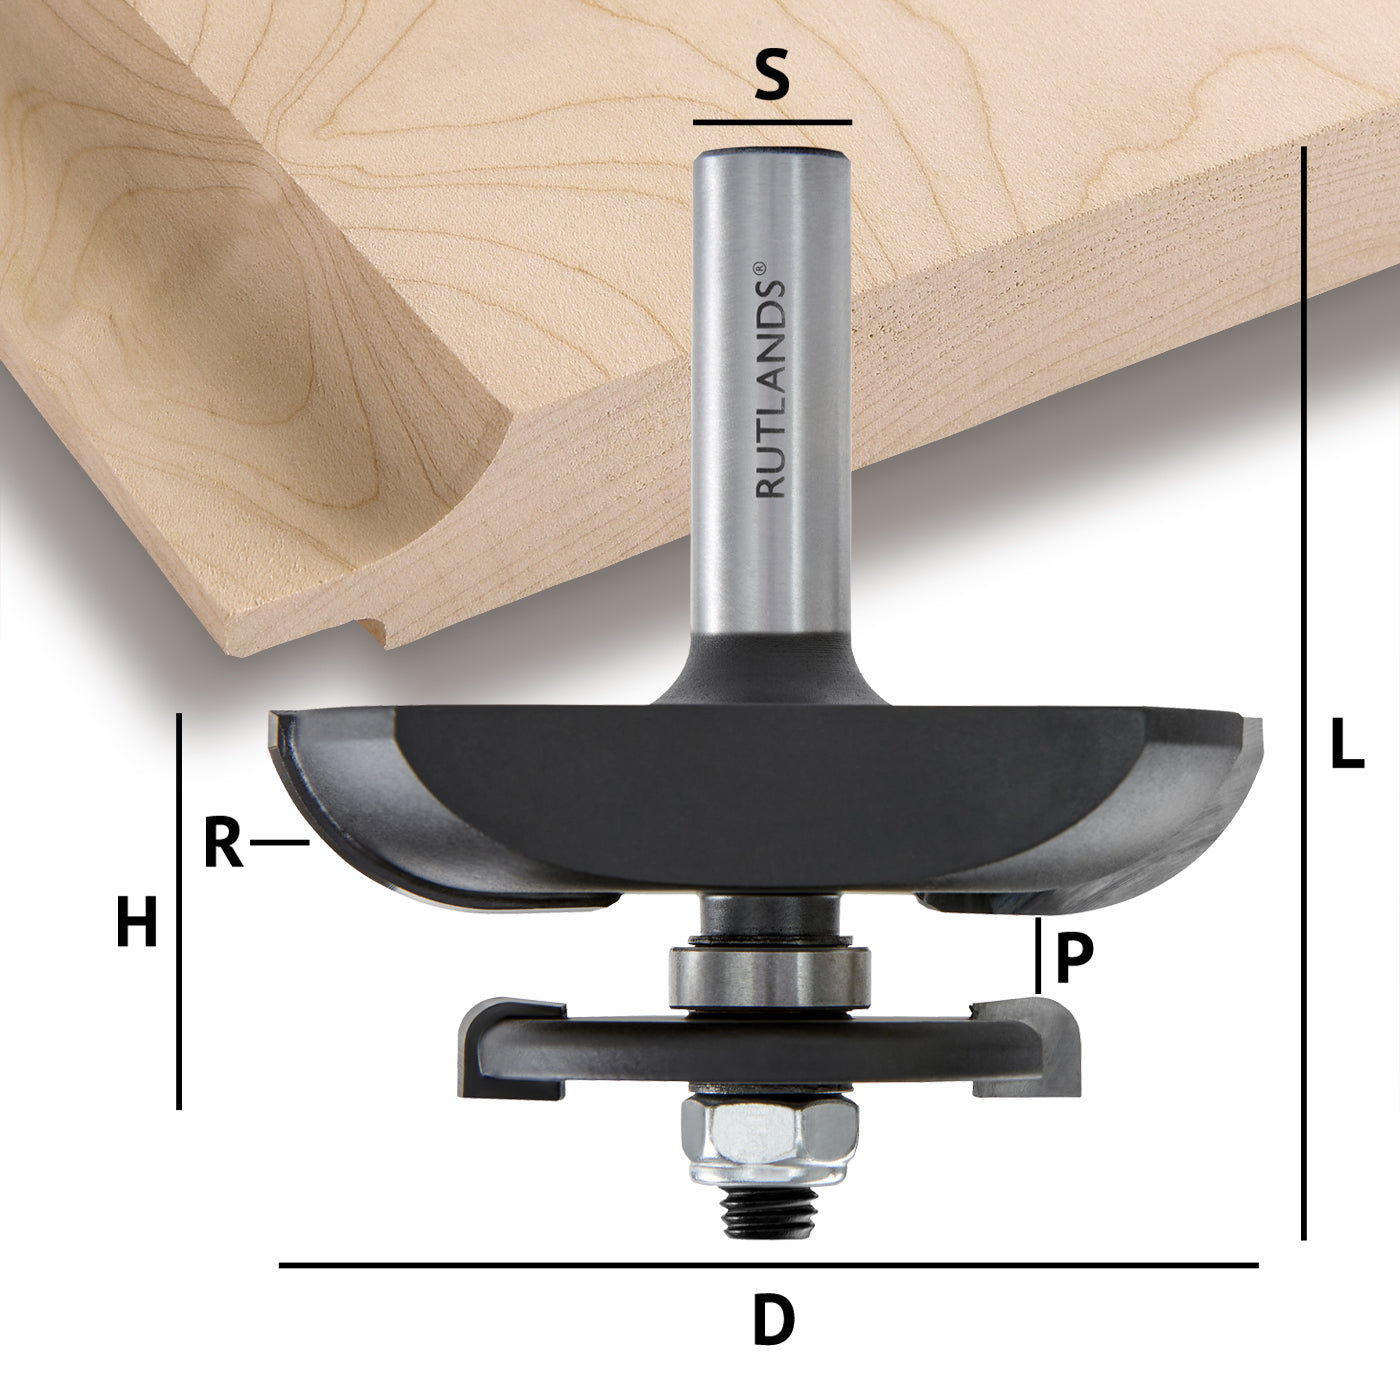 Router Bit - Raised Panel with Backcutter - Radius - D=79.4mm H=30.2mm R=19.1mm L=85.7mm S=1/2"